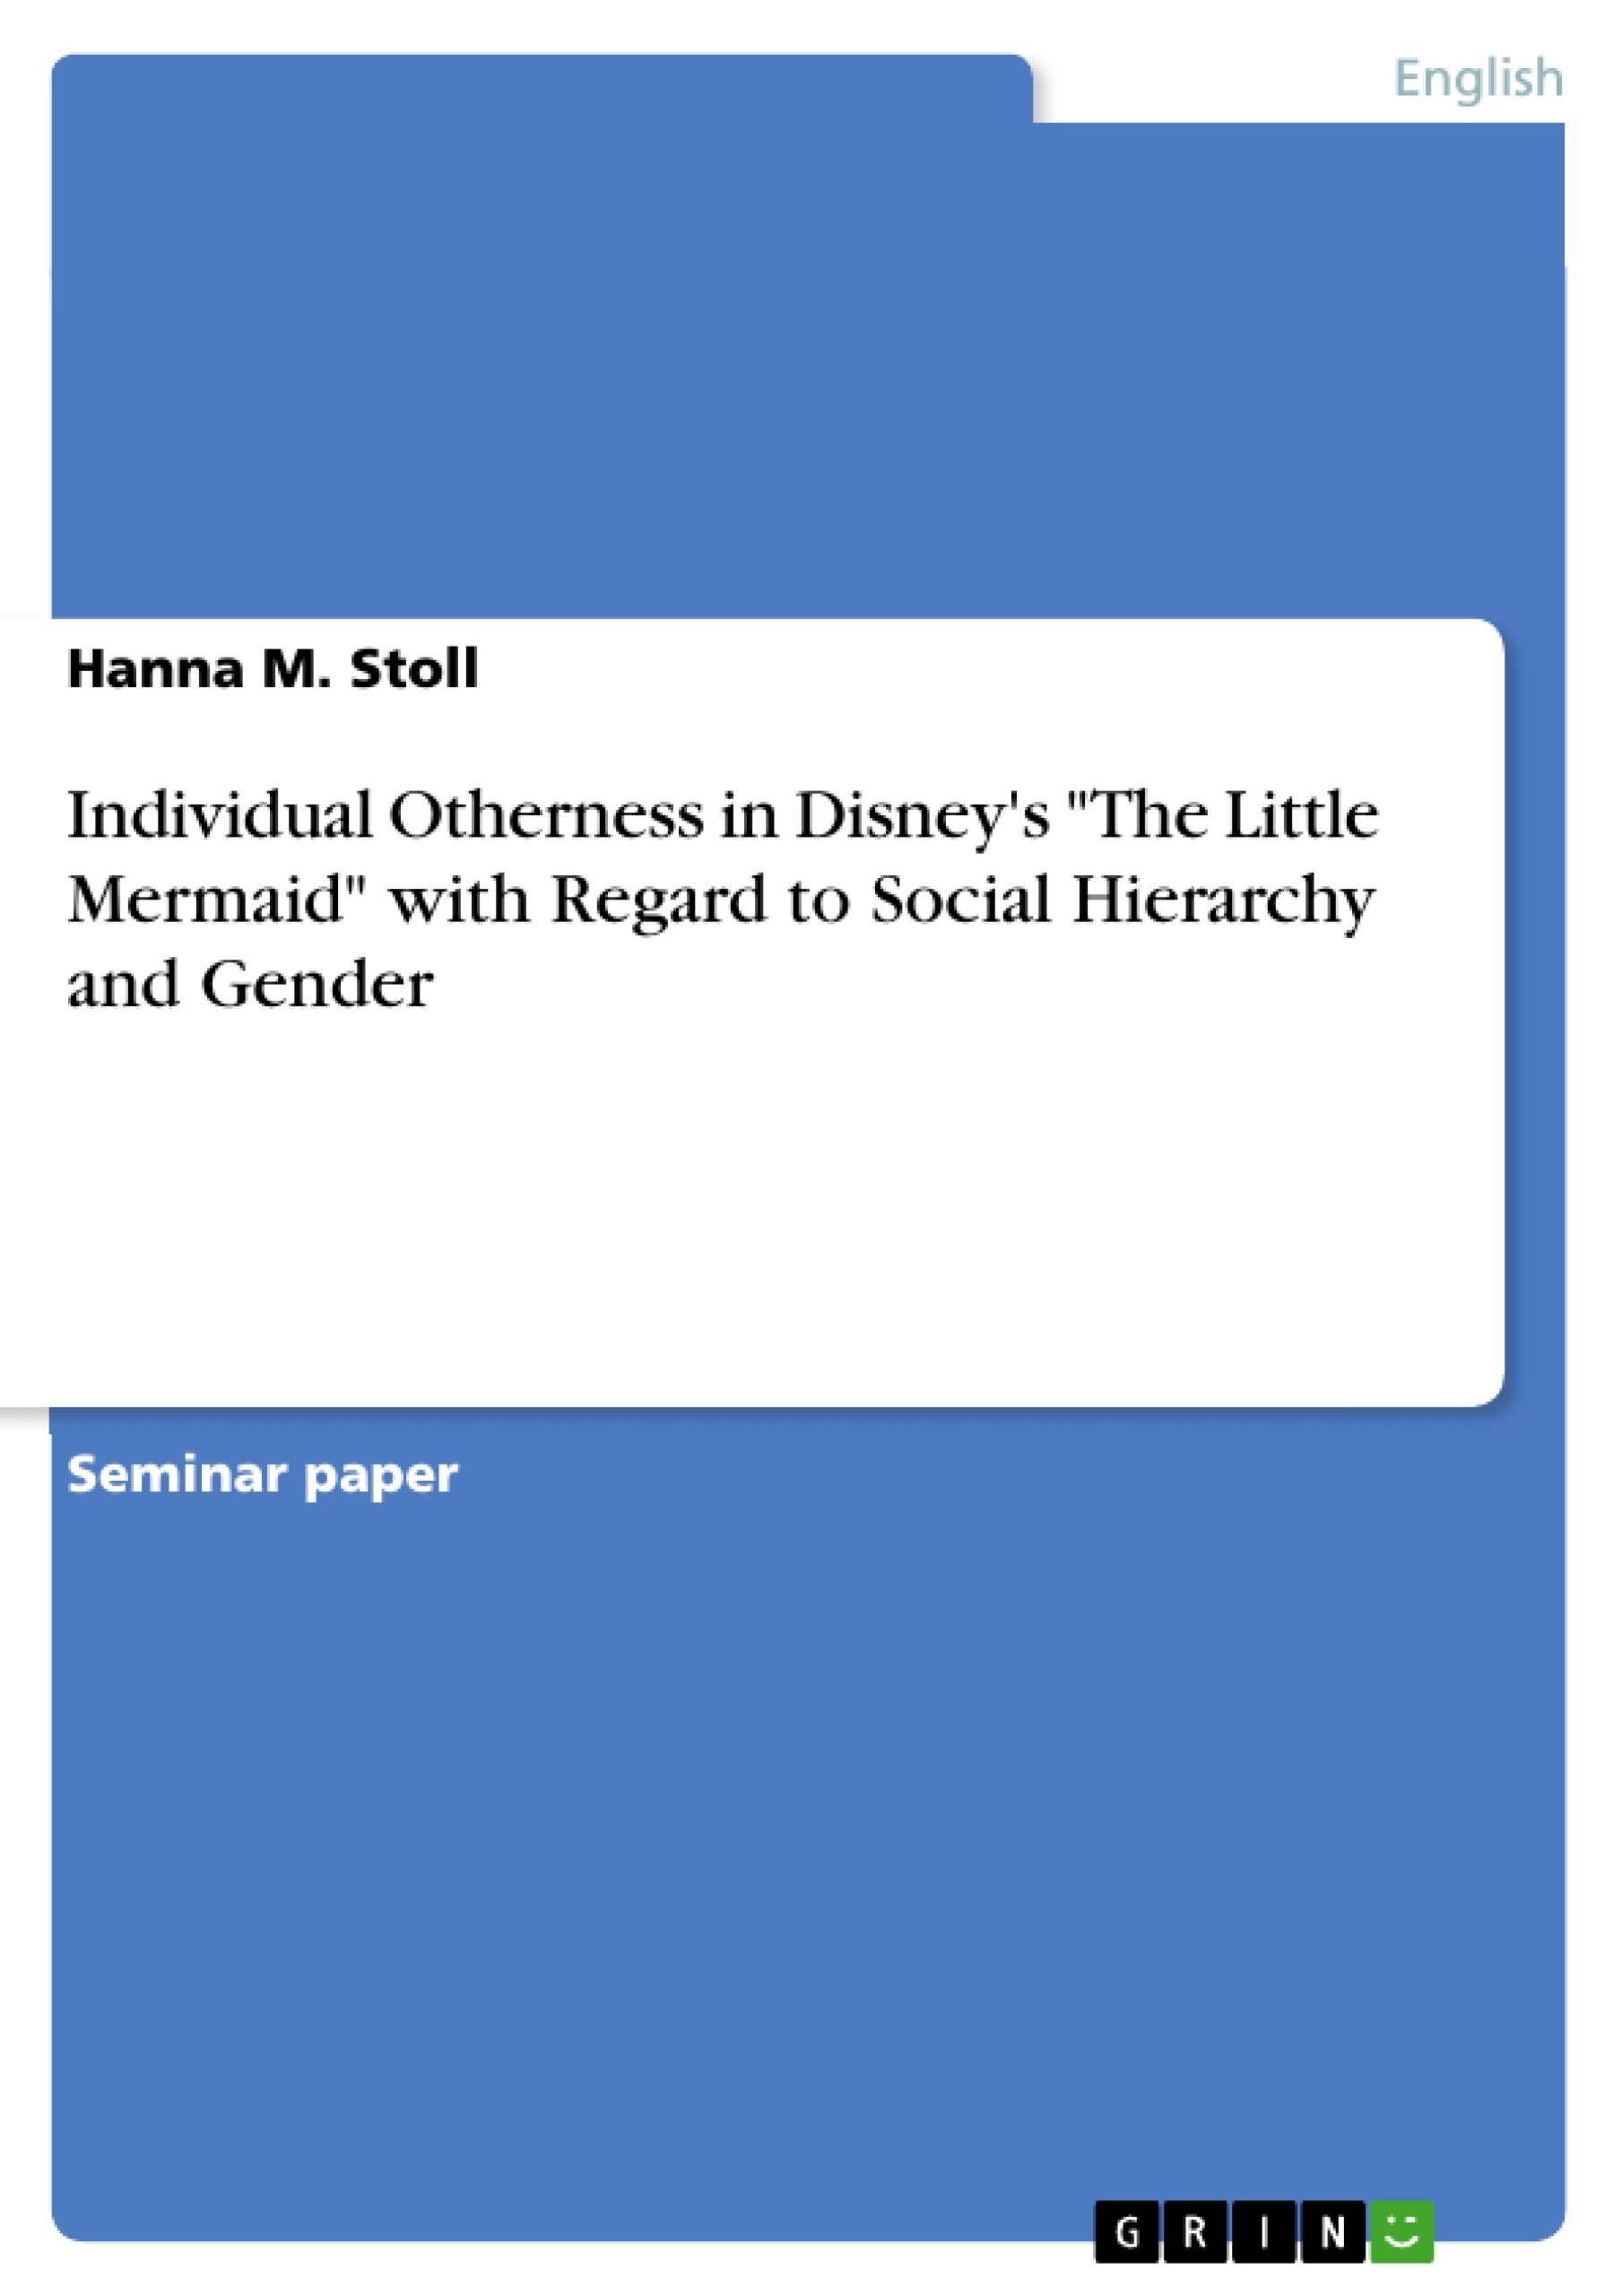 Titre: Individual Otherness in Disney's "The Little Mermaid" with Regard to Social Hierarchy and Gender